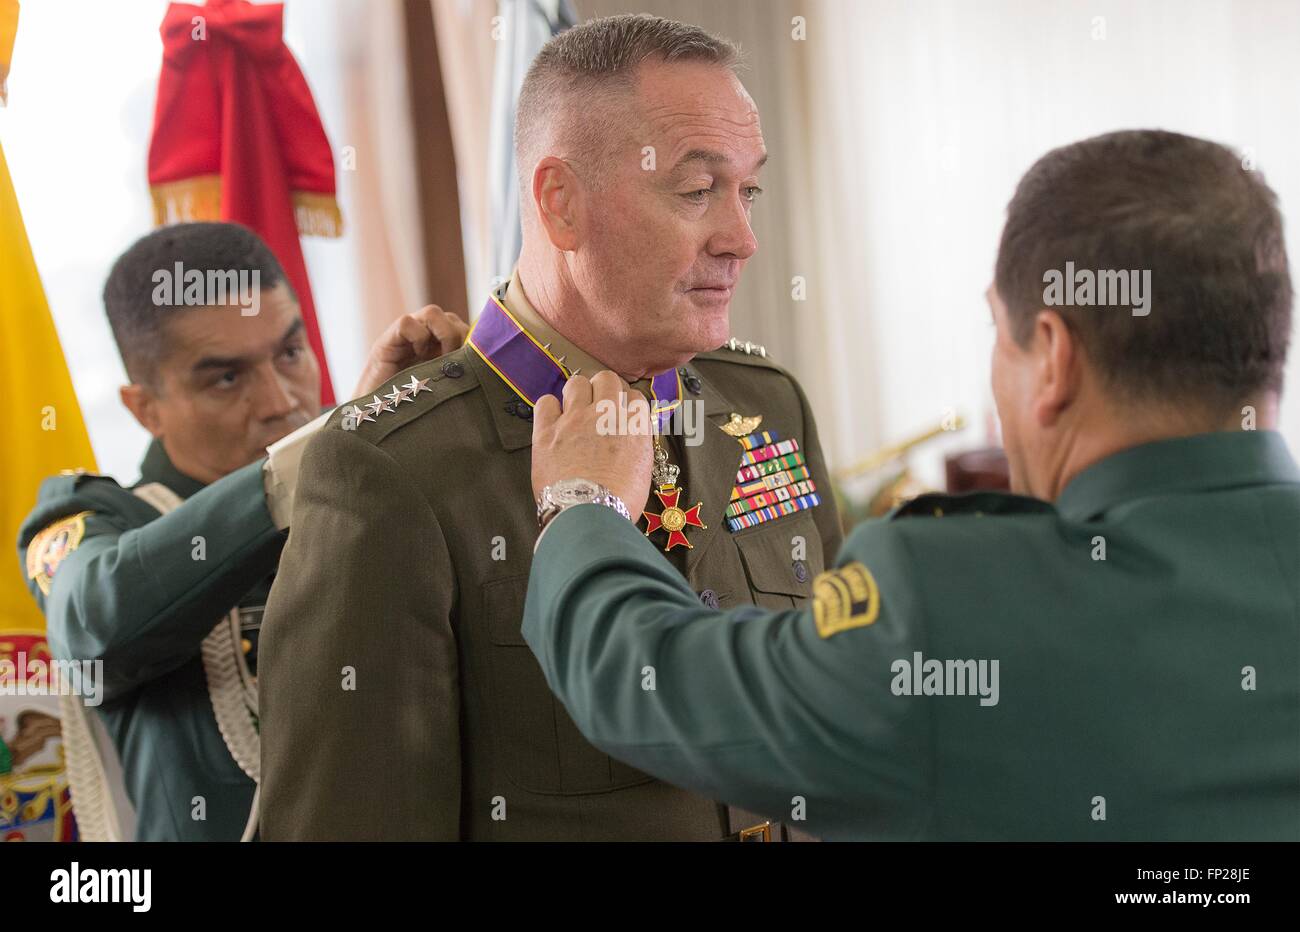 U.S. Chairman of the Joint Chiefs General Joseph Dunford is awarded the Fe en La Causa medal for his support of Colombian military efforts by Gen. Juan Pablo Rodriguez, general commander of the Armed Forces of Colombia, at the Headquarters of the Military Forces March 10, 2016  in Bogota, Colombia. Stock Photo